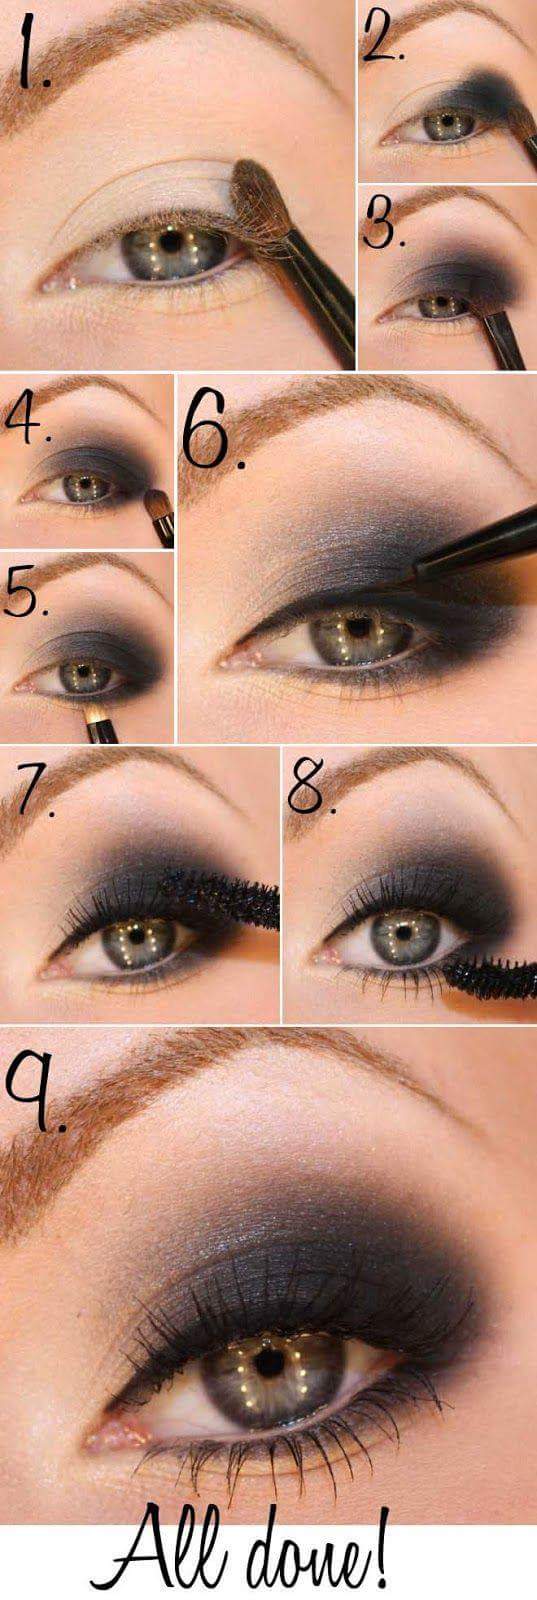 15 smokey eye tutorials - step by step guide to perfect